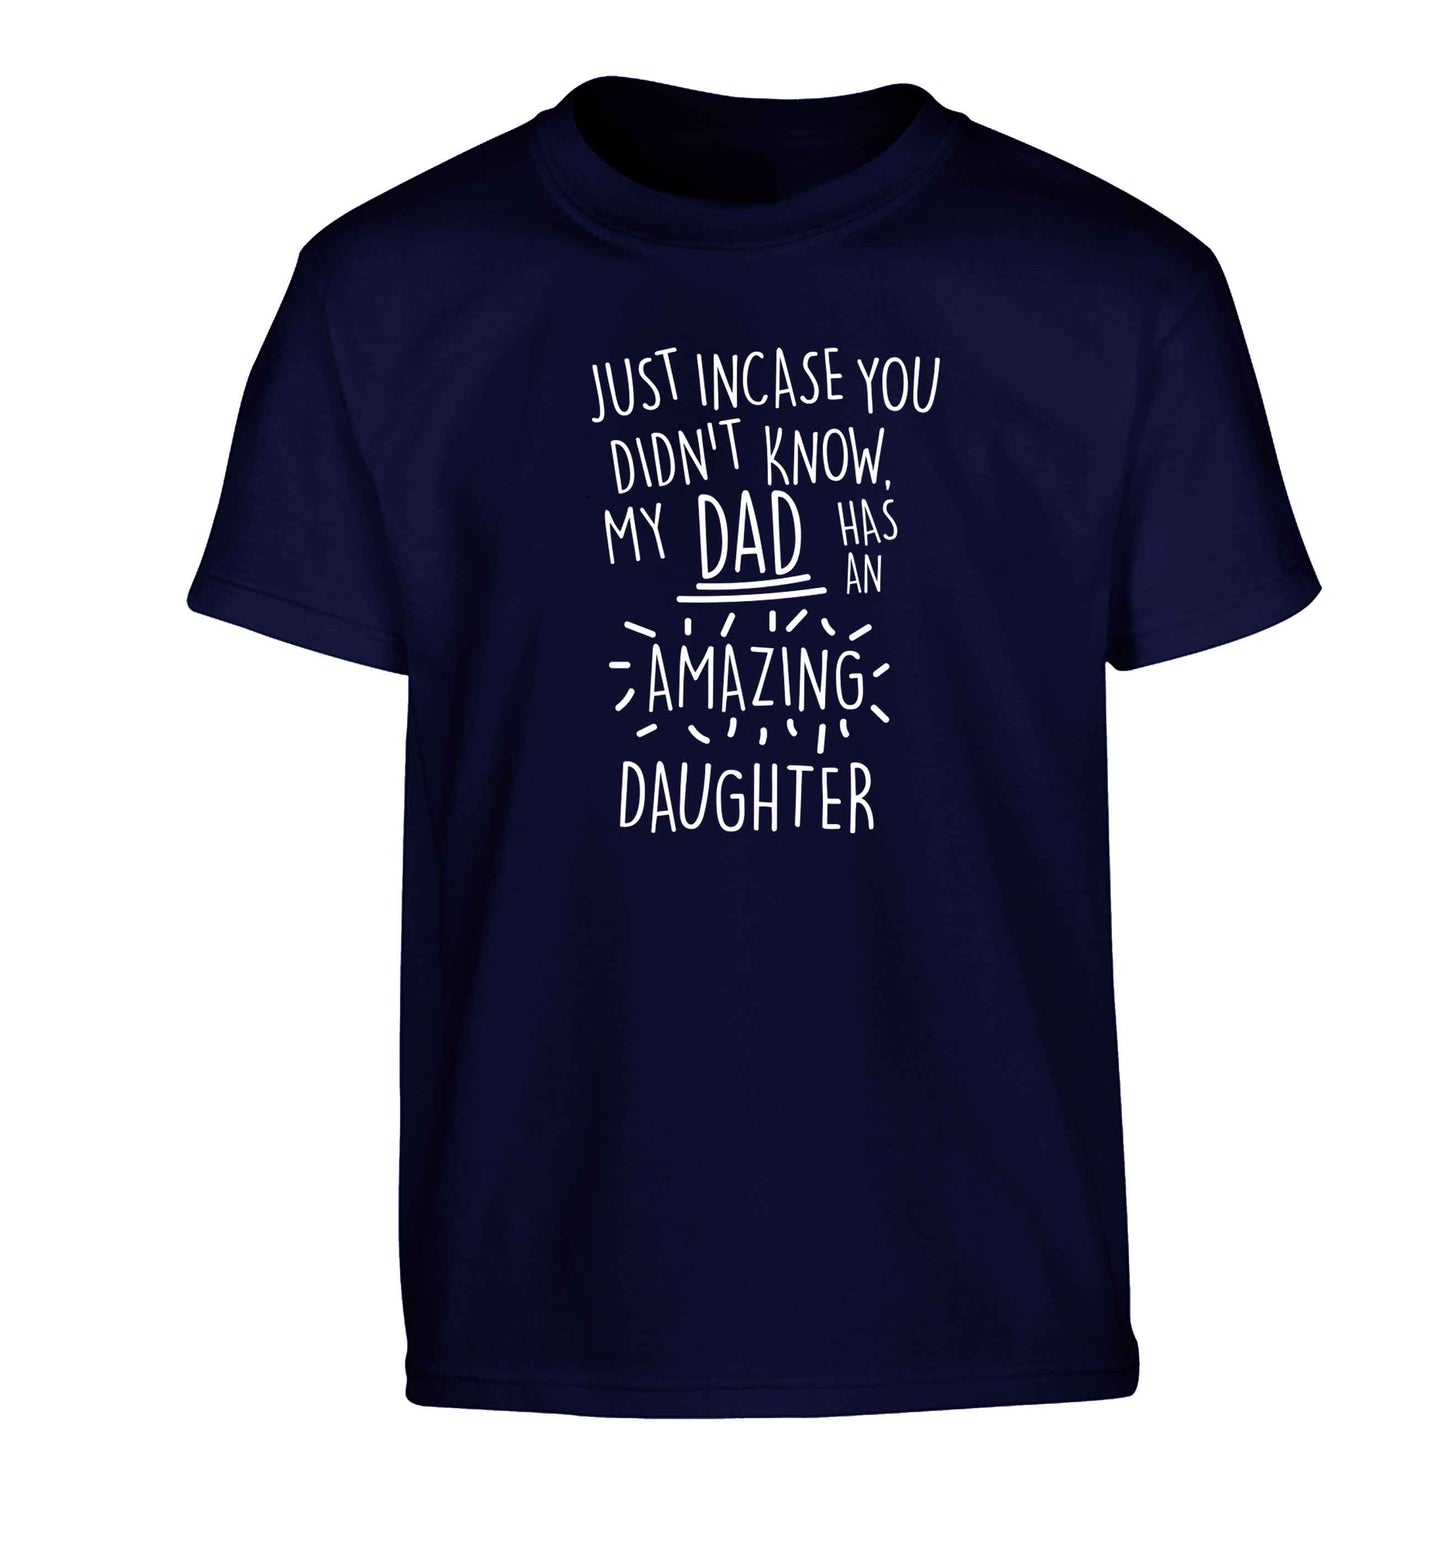 Just incase you didn't know my dad has an amazing daughter Children's navy Tshirt 12-13 Years